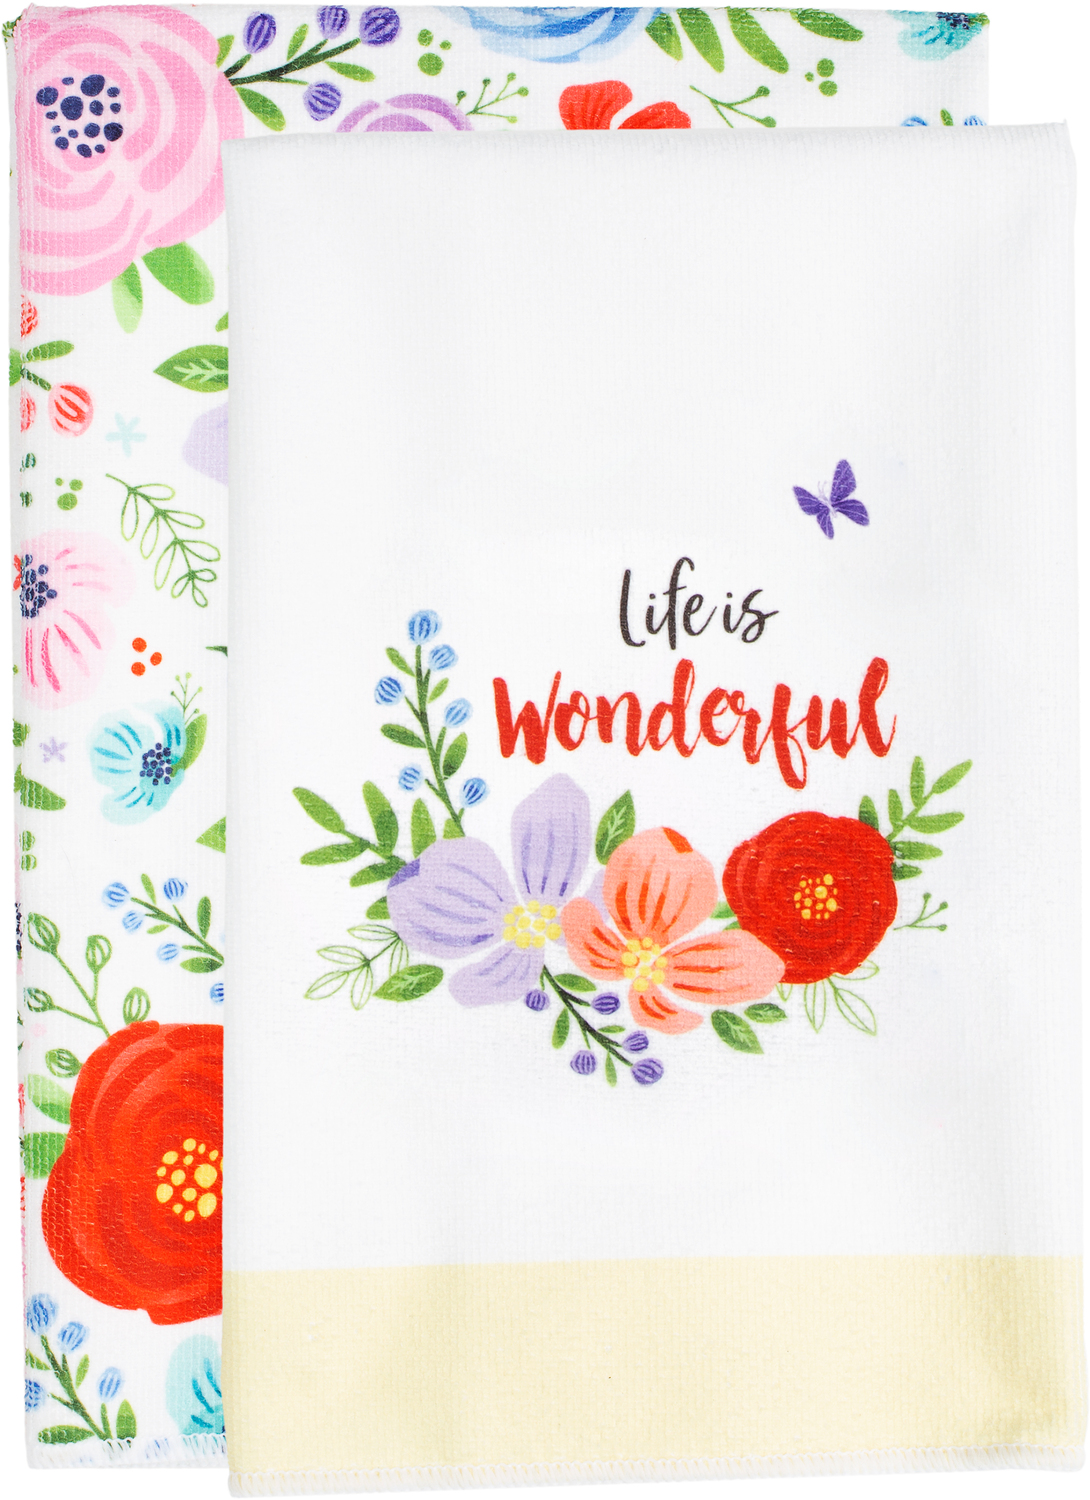 Wonderful Life by Bunches of Love - Wonderful Life - Tea Towel Gift Set
(2 - 19.75" x 27.5")